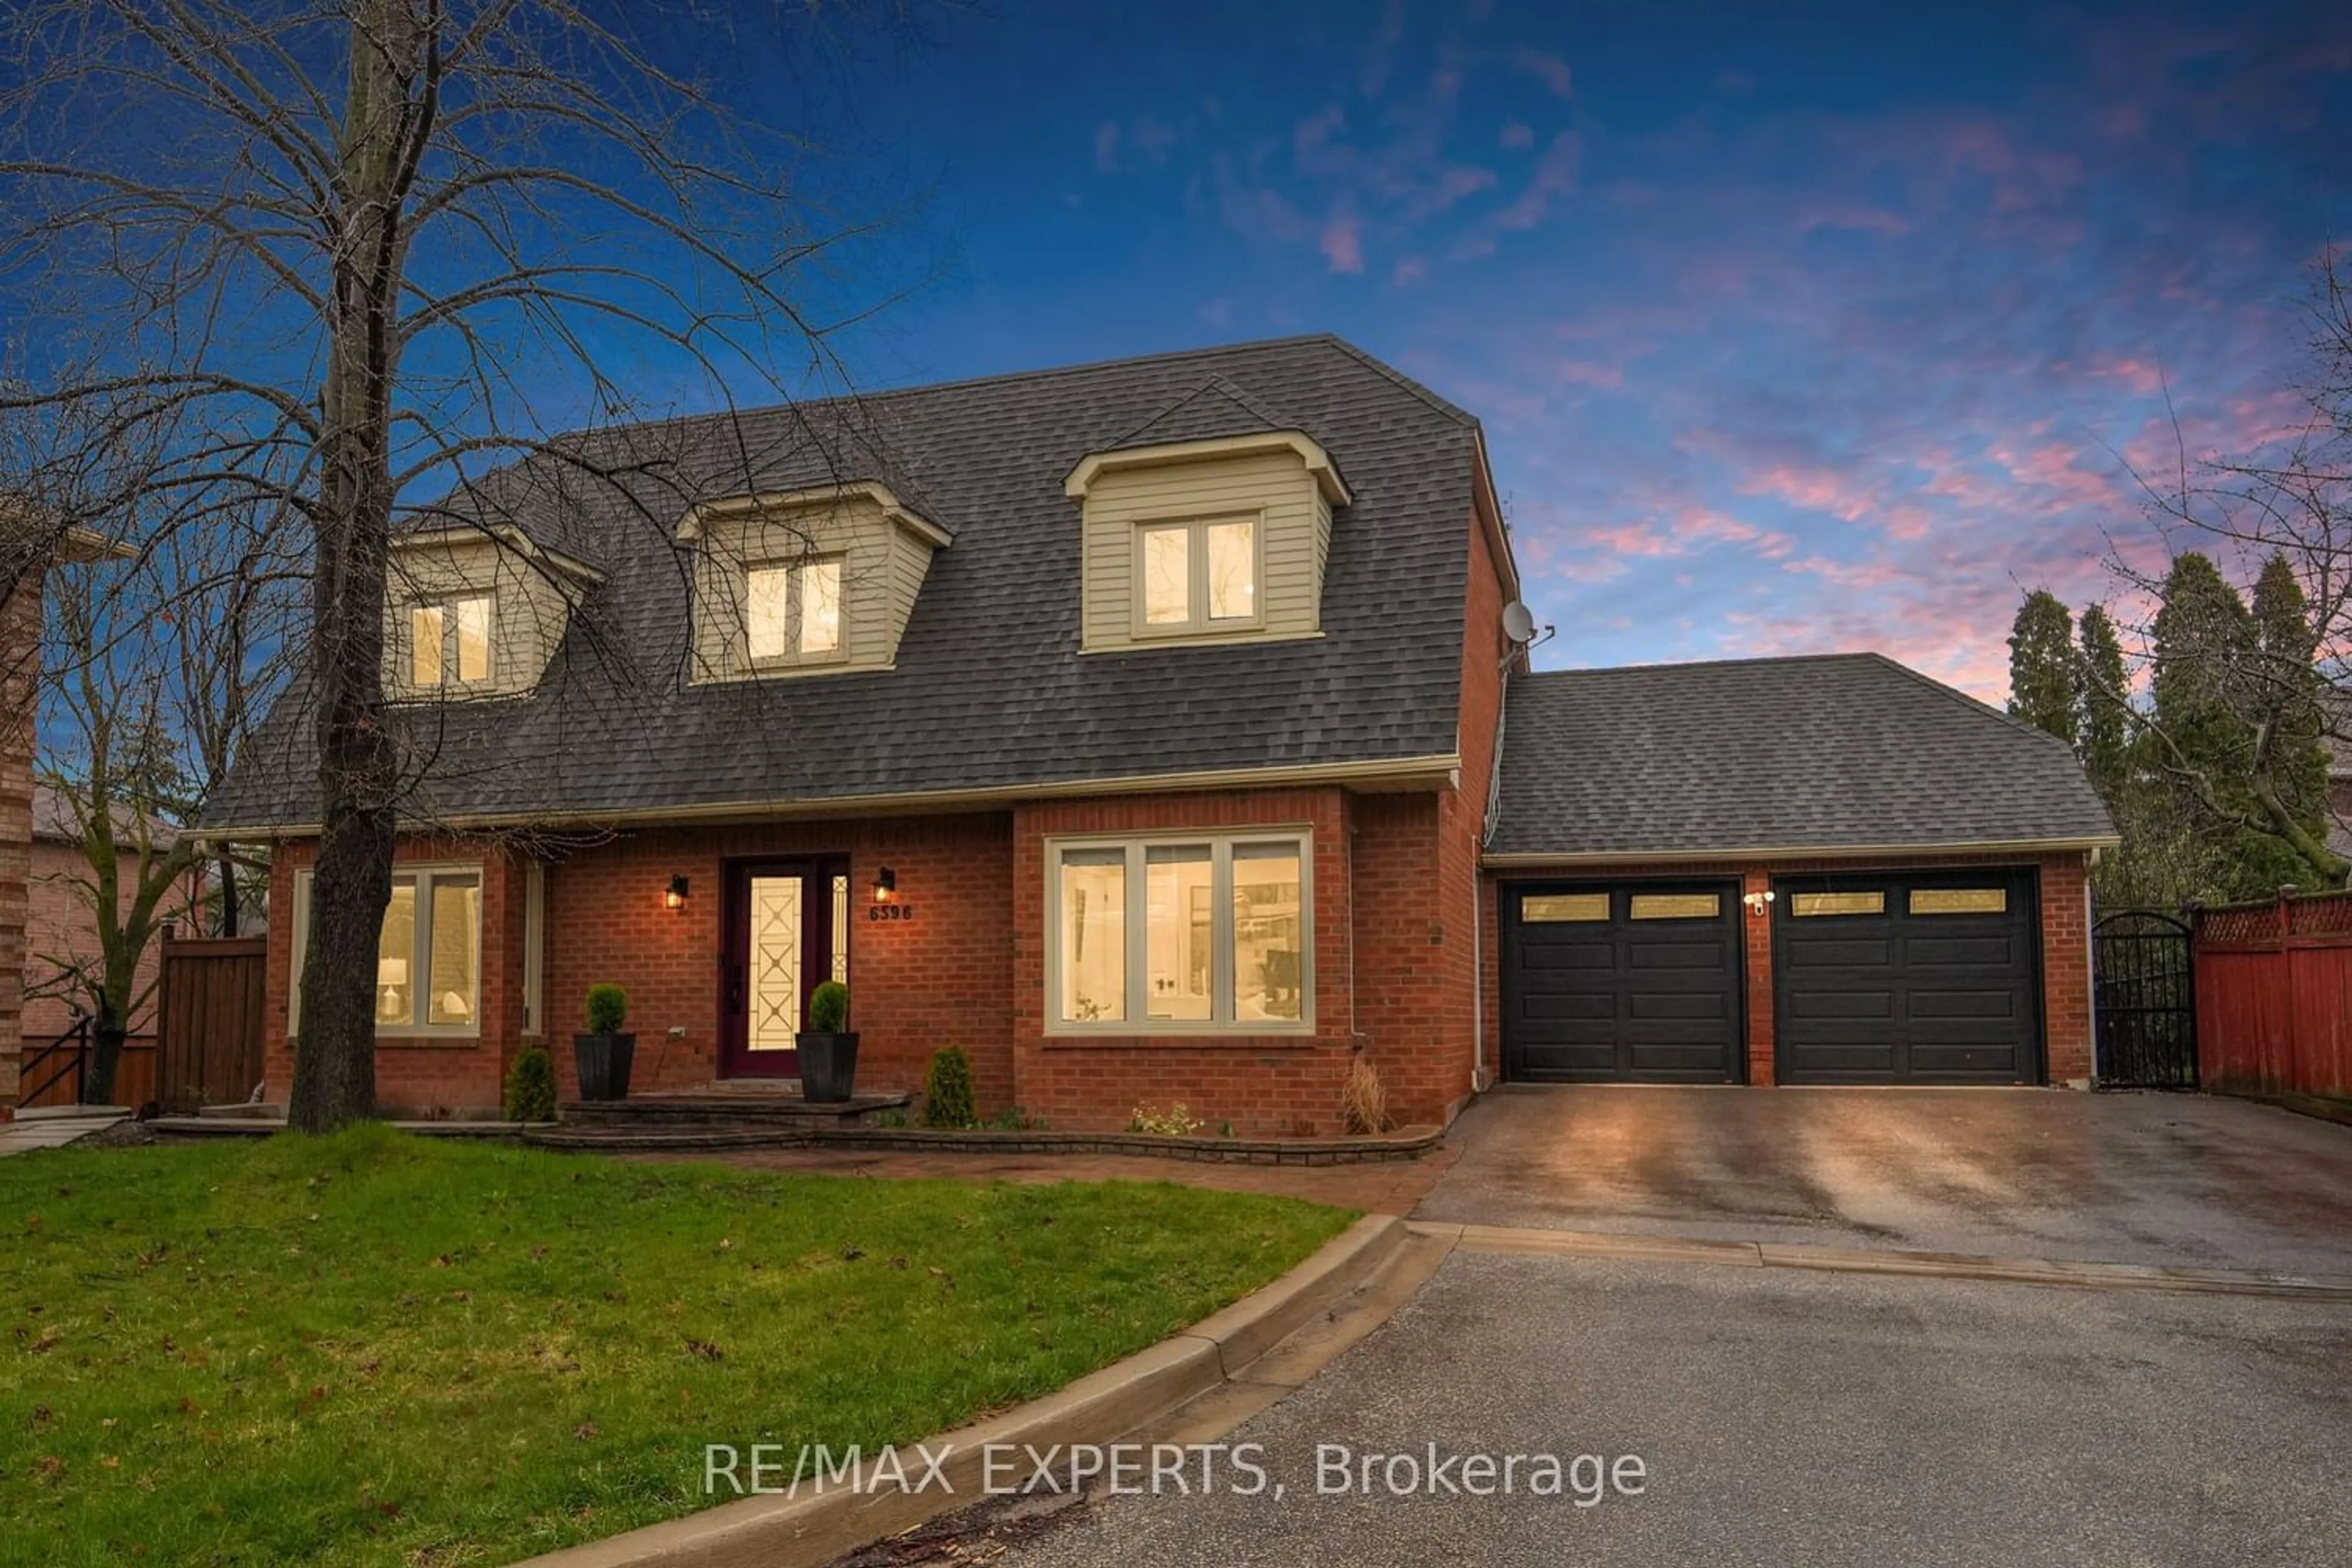 Home with brick exterior material for 6596 Mockingbird Lane, Mississauga Ontario L5N 5K3